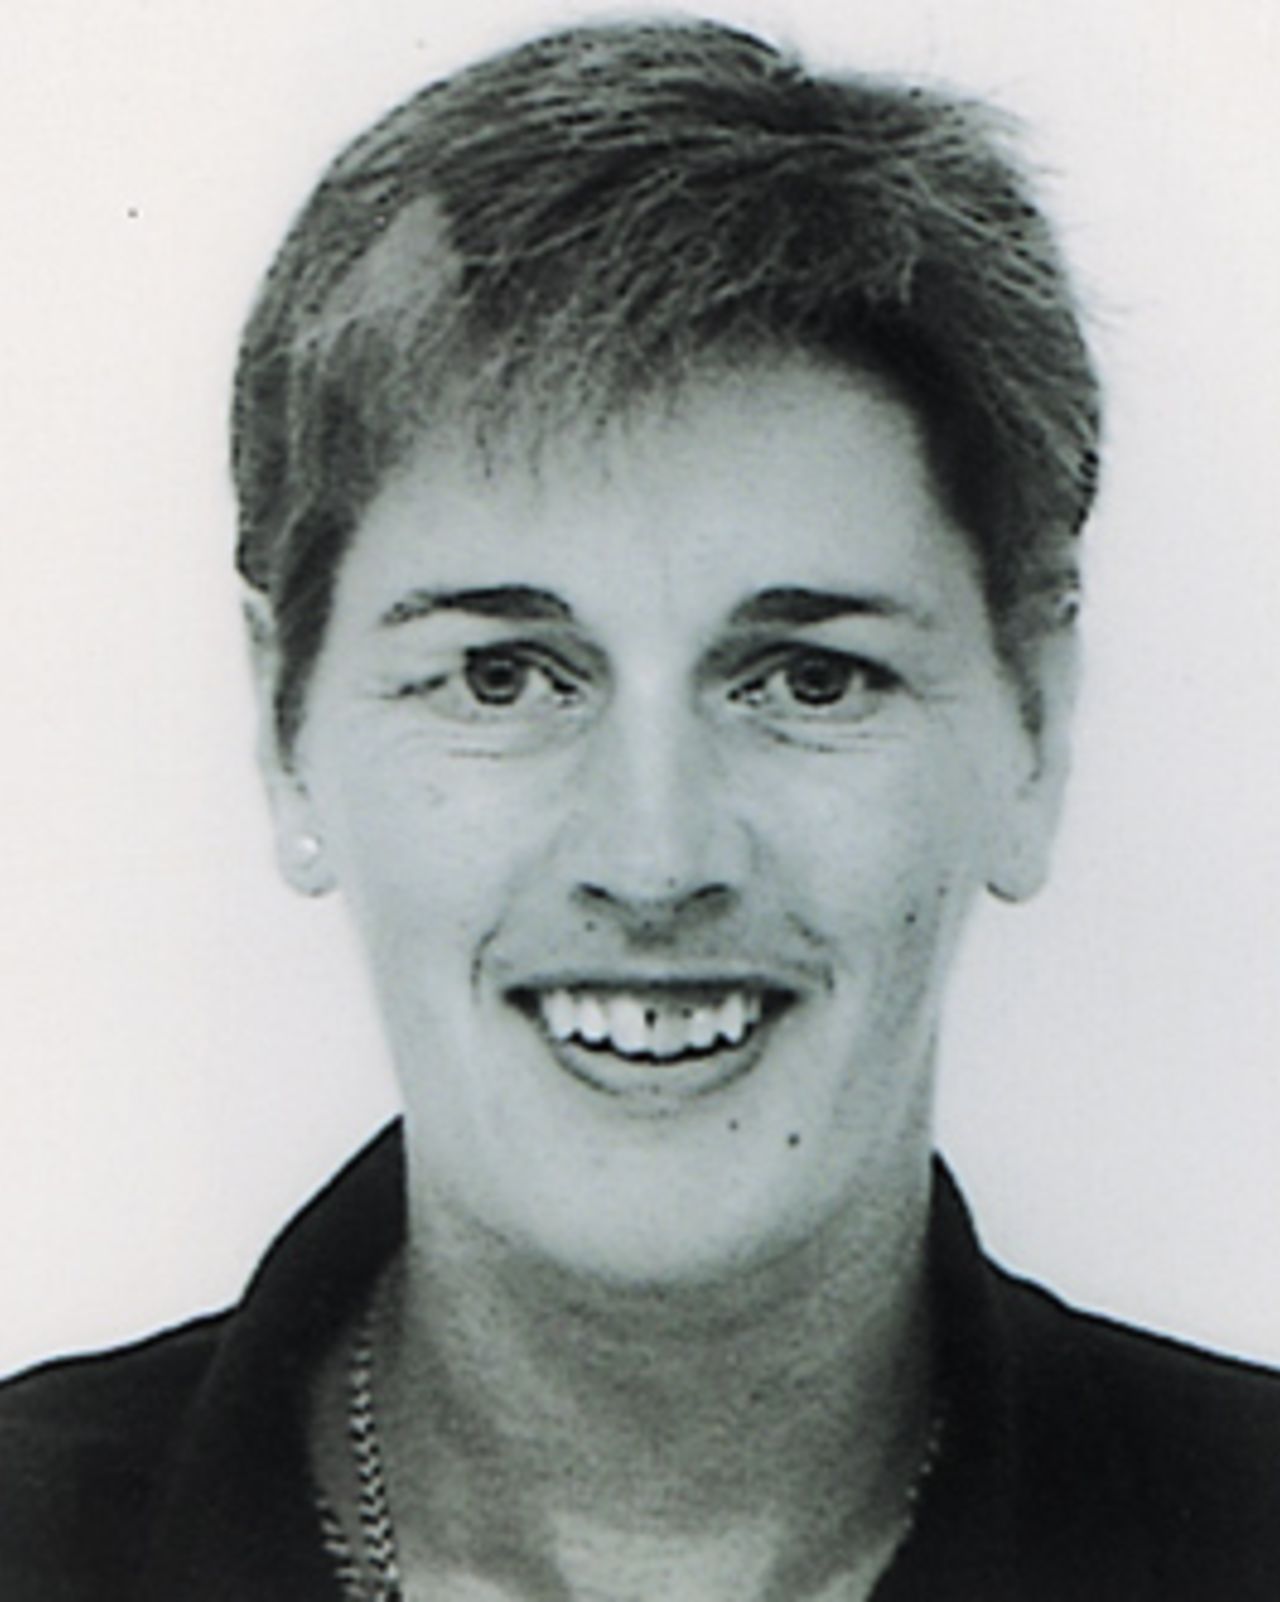 Portrait of Nikki Squire - Ireland player in the CricInfo Women's World Cup 2000